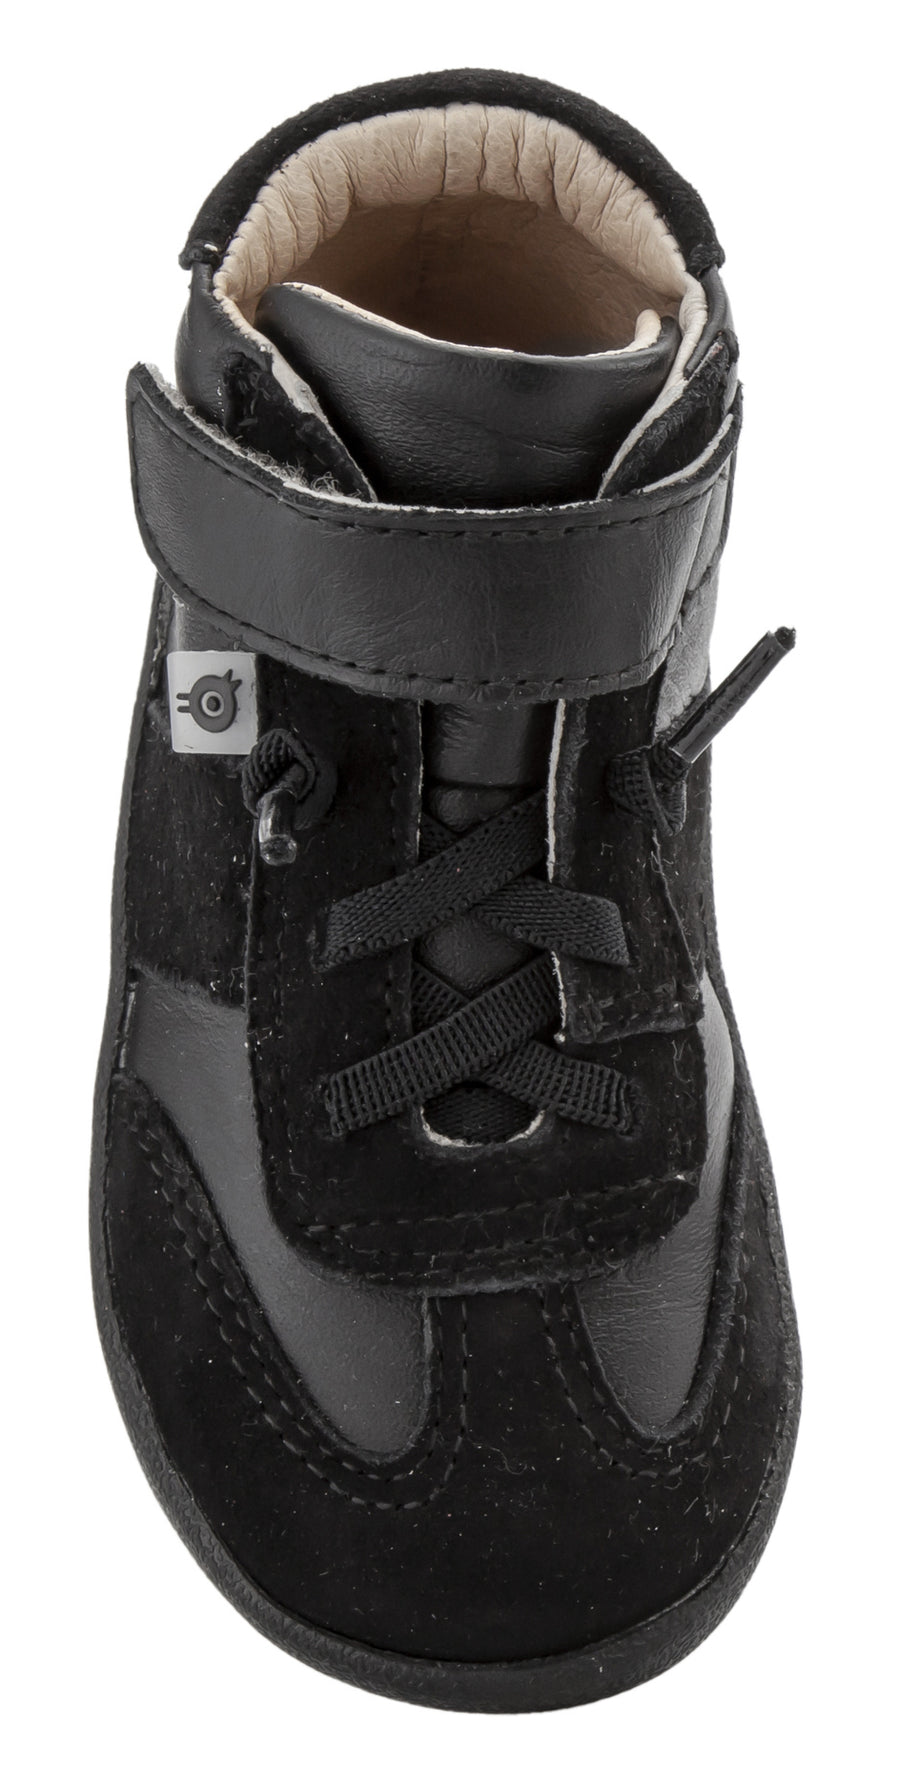 Old Soles Girl's & Boy's 5063 The cape Sneakers - Black/Black Suede